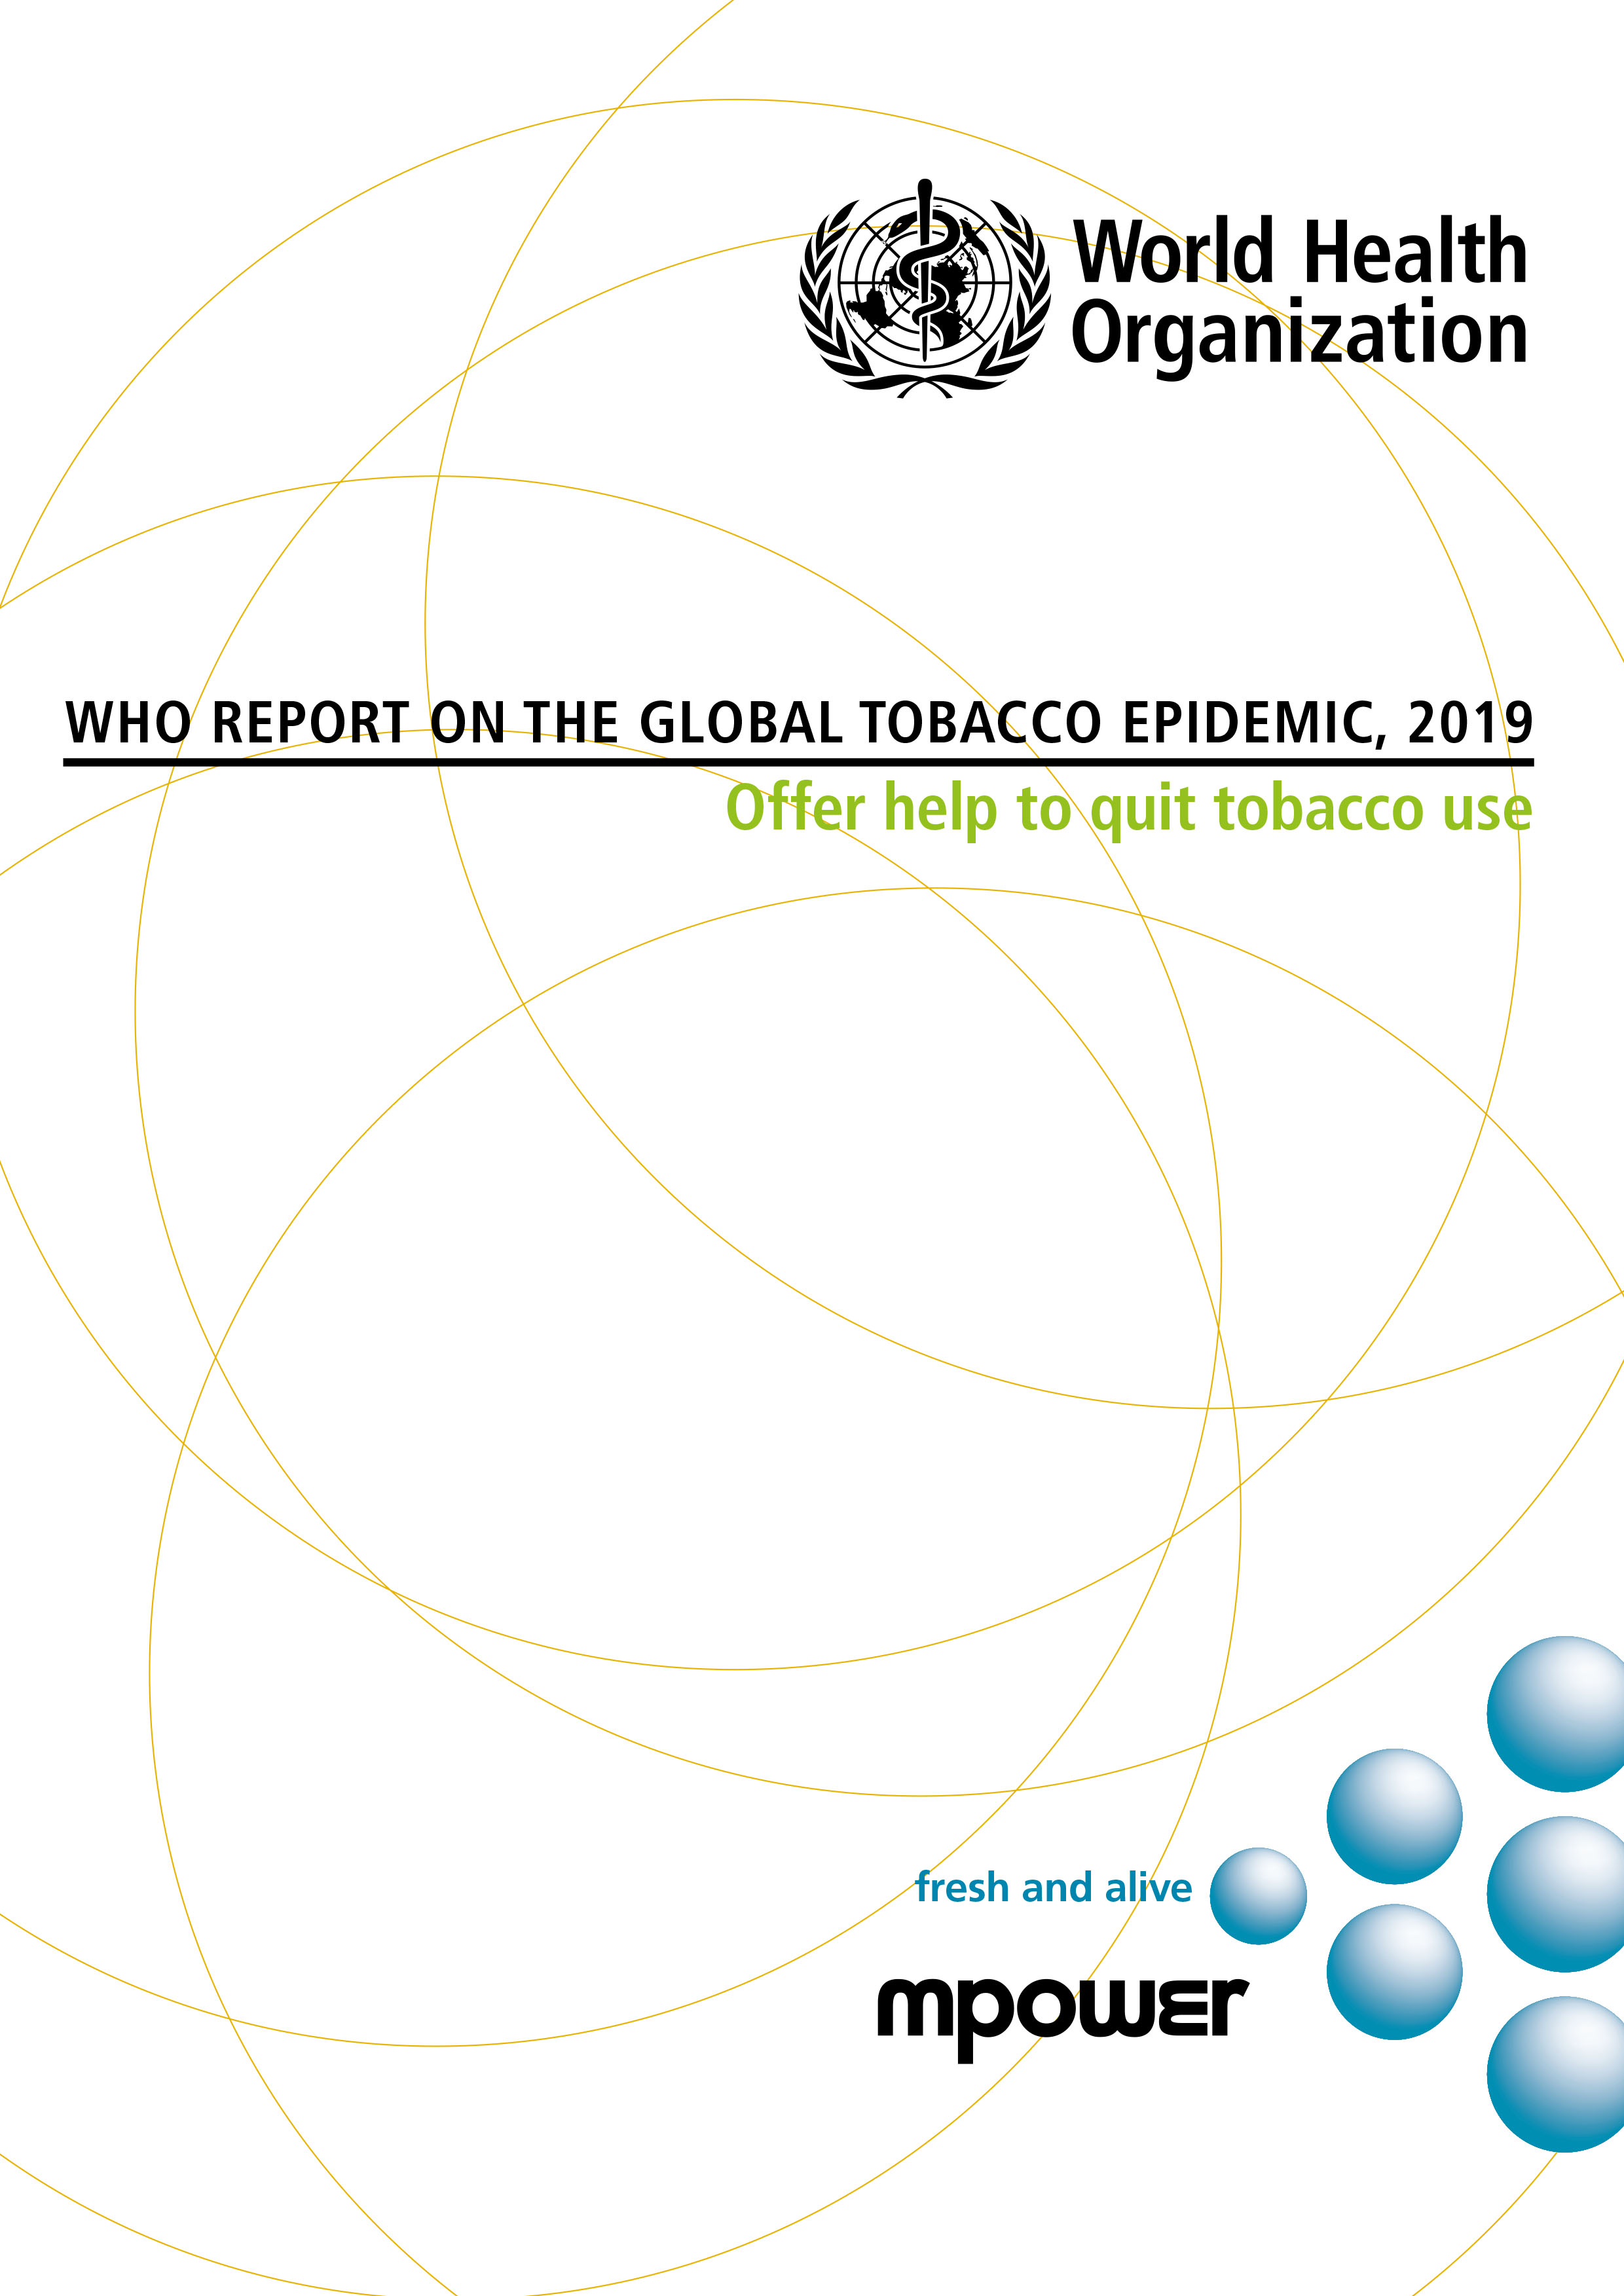 WHO report on global tobacco epidemic 2019